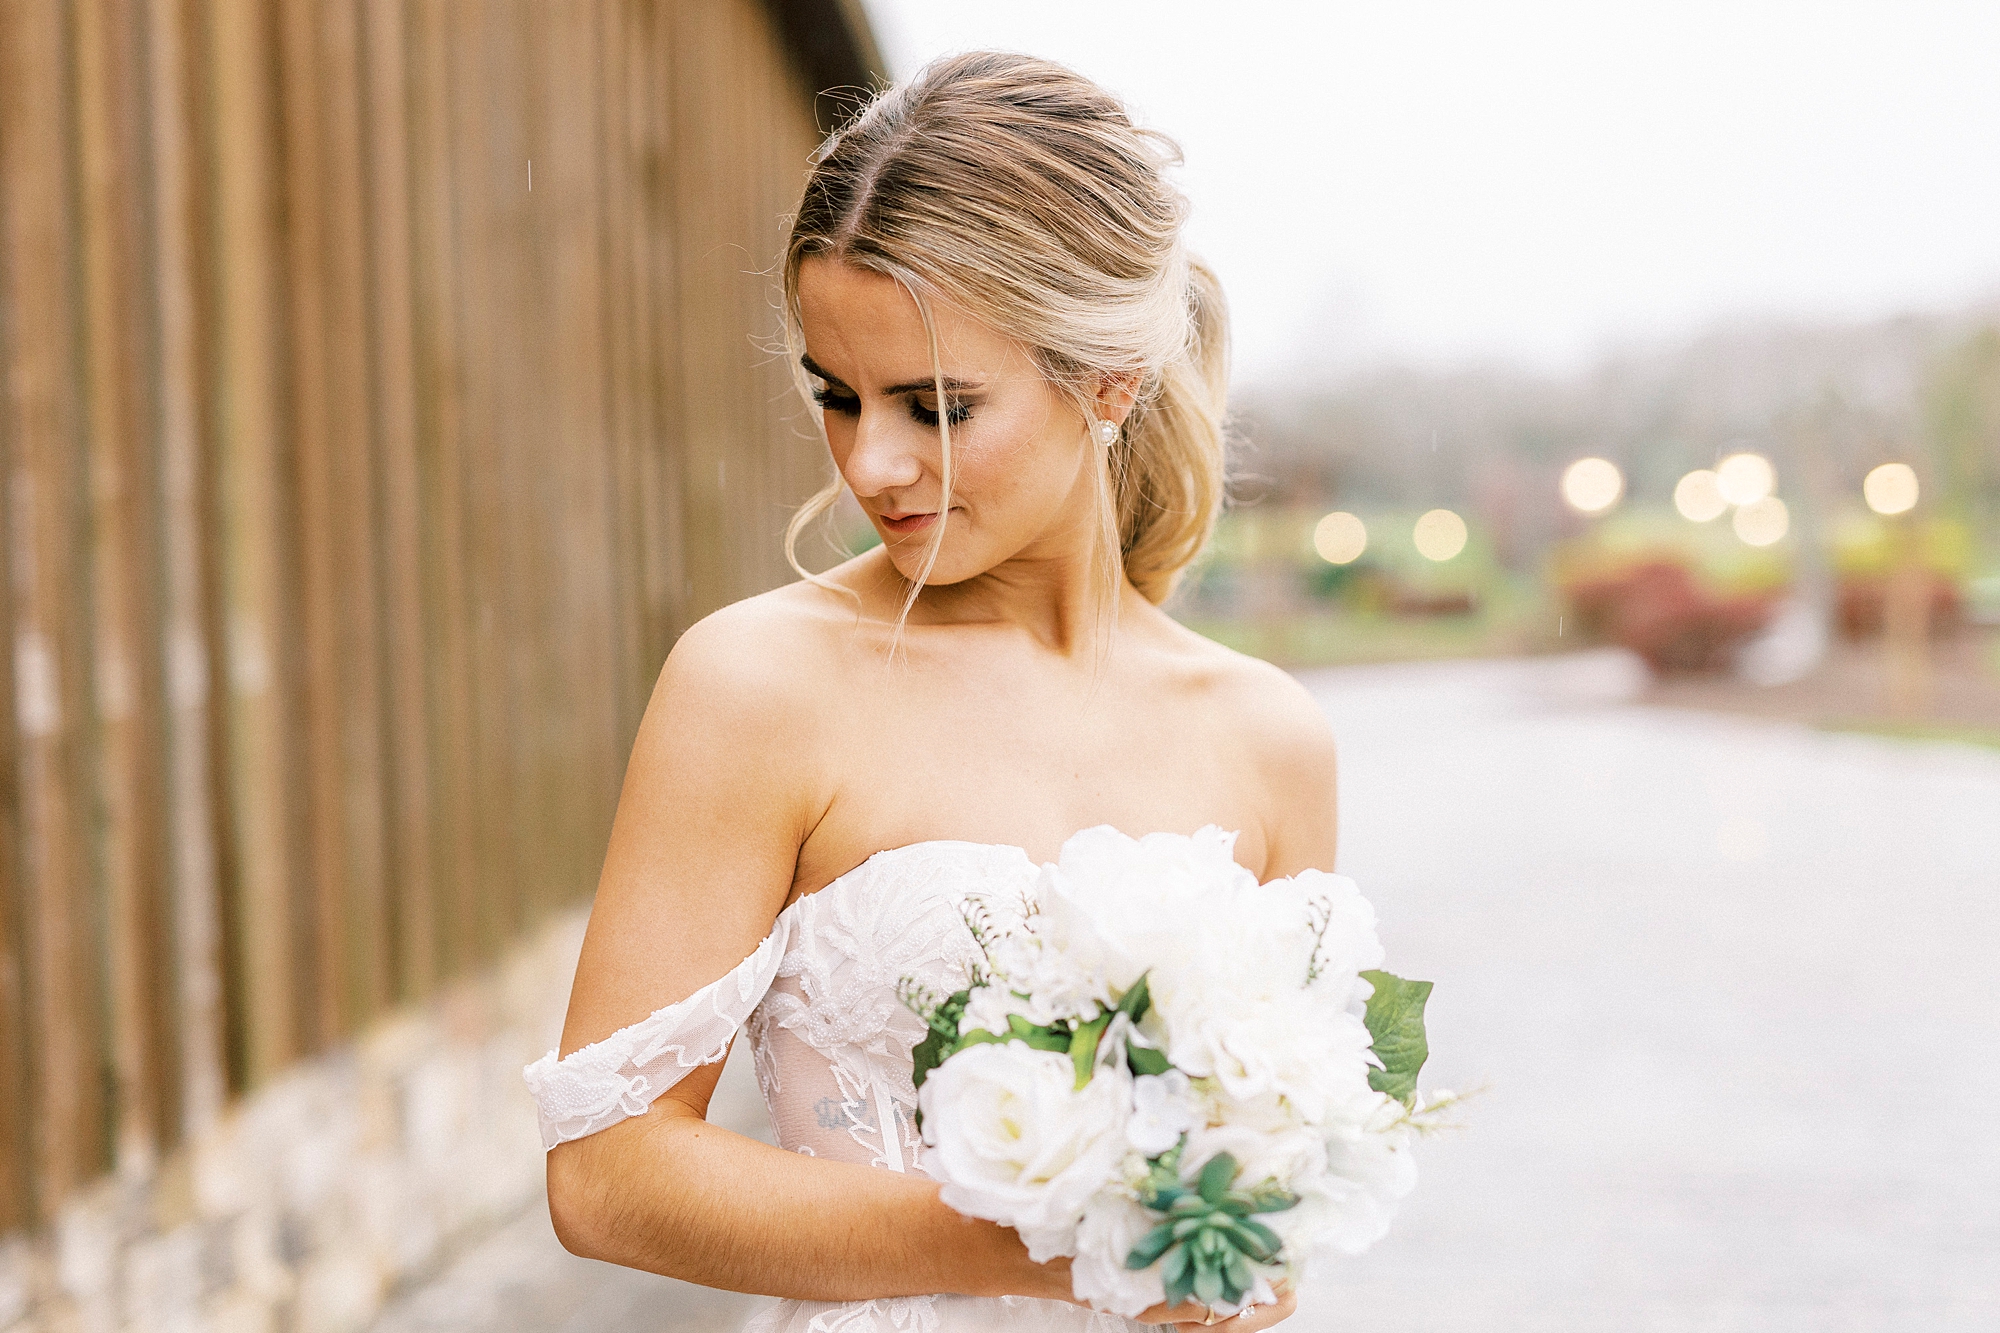 bride in off-the-shoulder wedding gown looks over shoulder holding bouquet of white flowers and succulents 